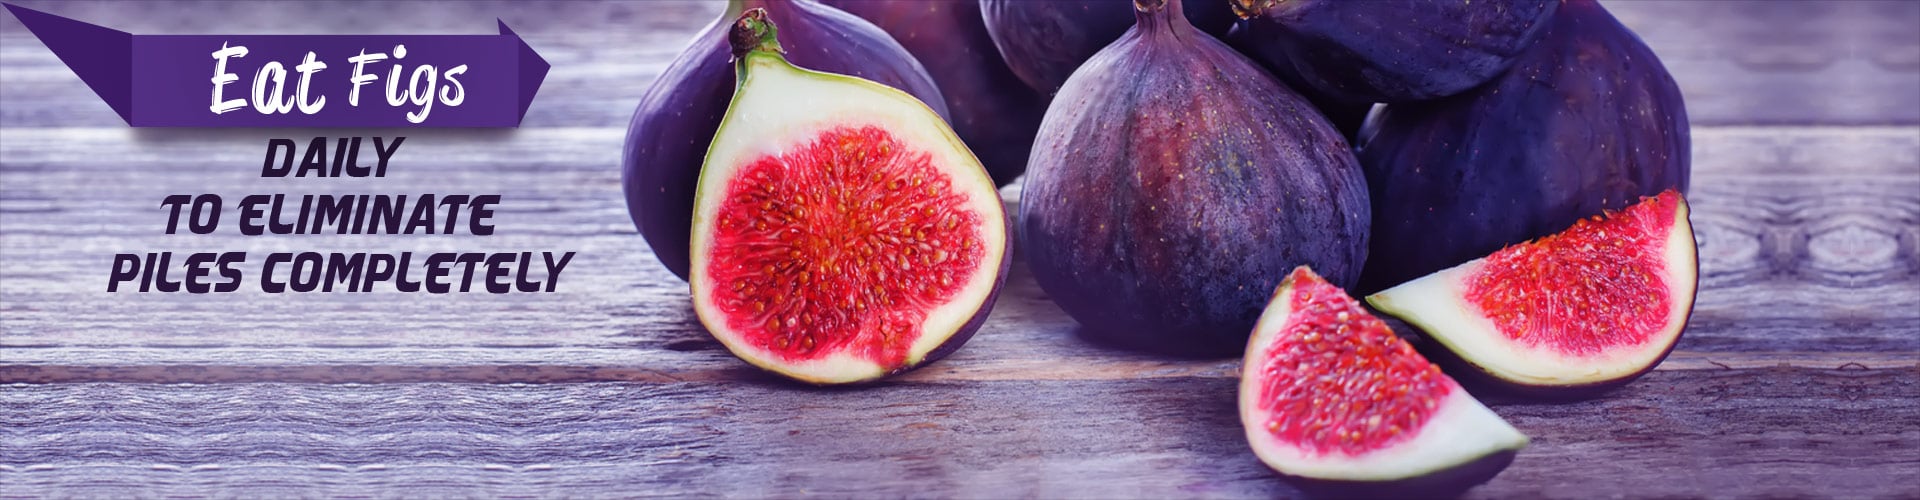 Eat Figs Daily to Eliminate Piles Completely